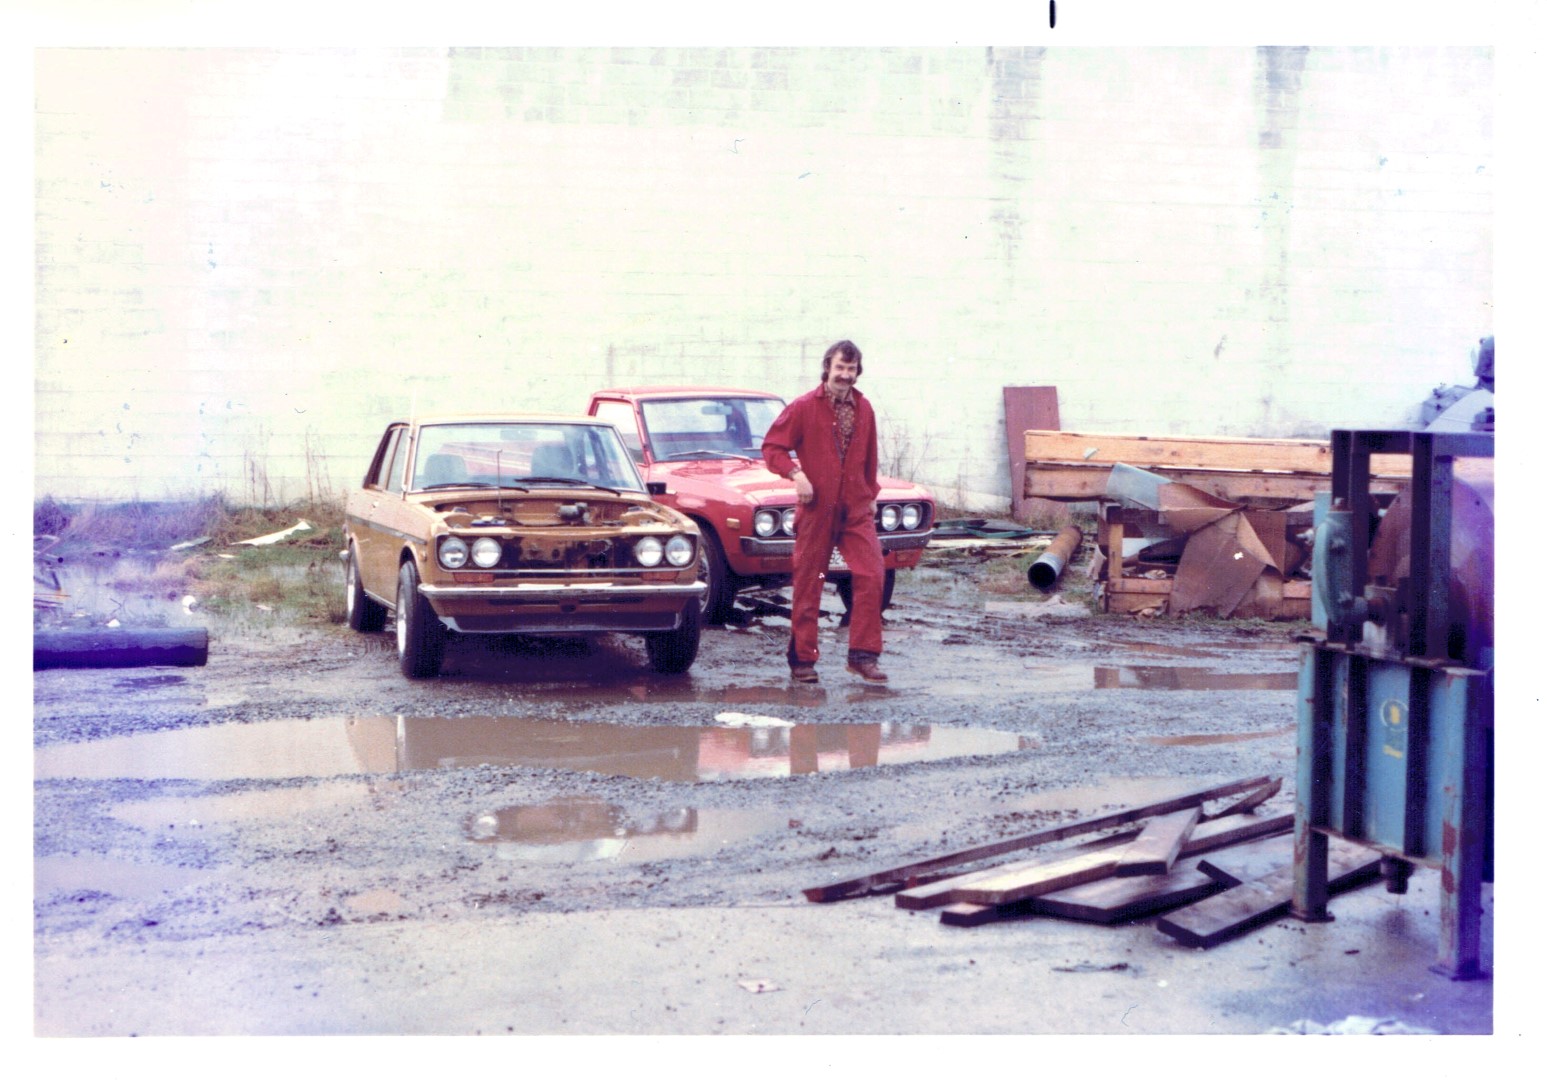 My 1972 at the beginning of swapping my turbo motor from my wagon. My friend Peter Smith helped, he was a factory rider for Honda Canada, riding TRIALS, champion in 1970-71